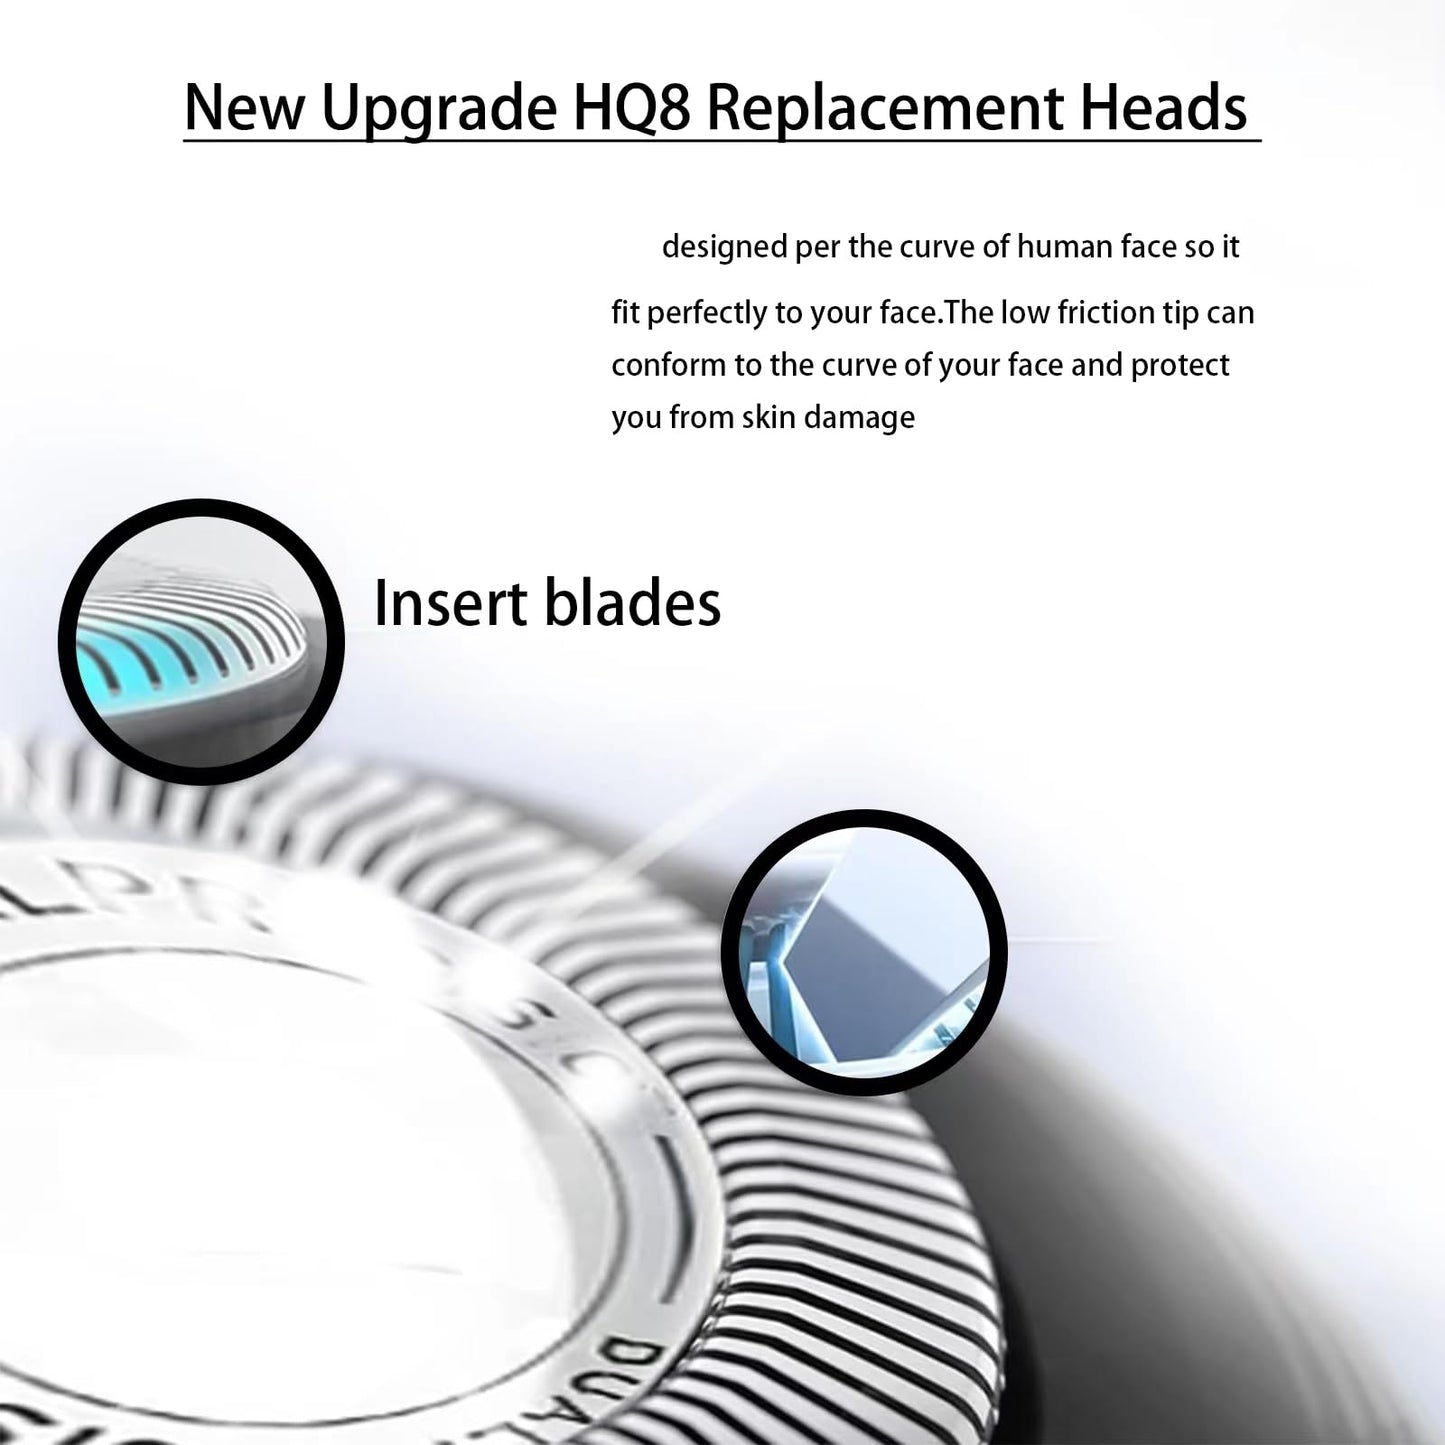 HQ8 Replacement Heads for Philips Norelco Aquatec Replacement Heads for Norelco Aquatec Shavers Razor Replacement Blades for PT720 PT730 AT880 At830 AT810 AT815, Upgraded HQ8 Blades,6Pack & Brush